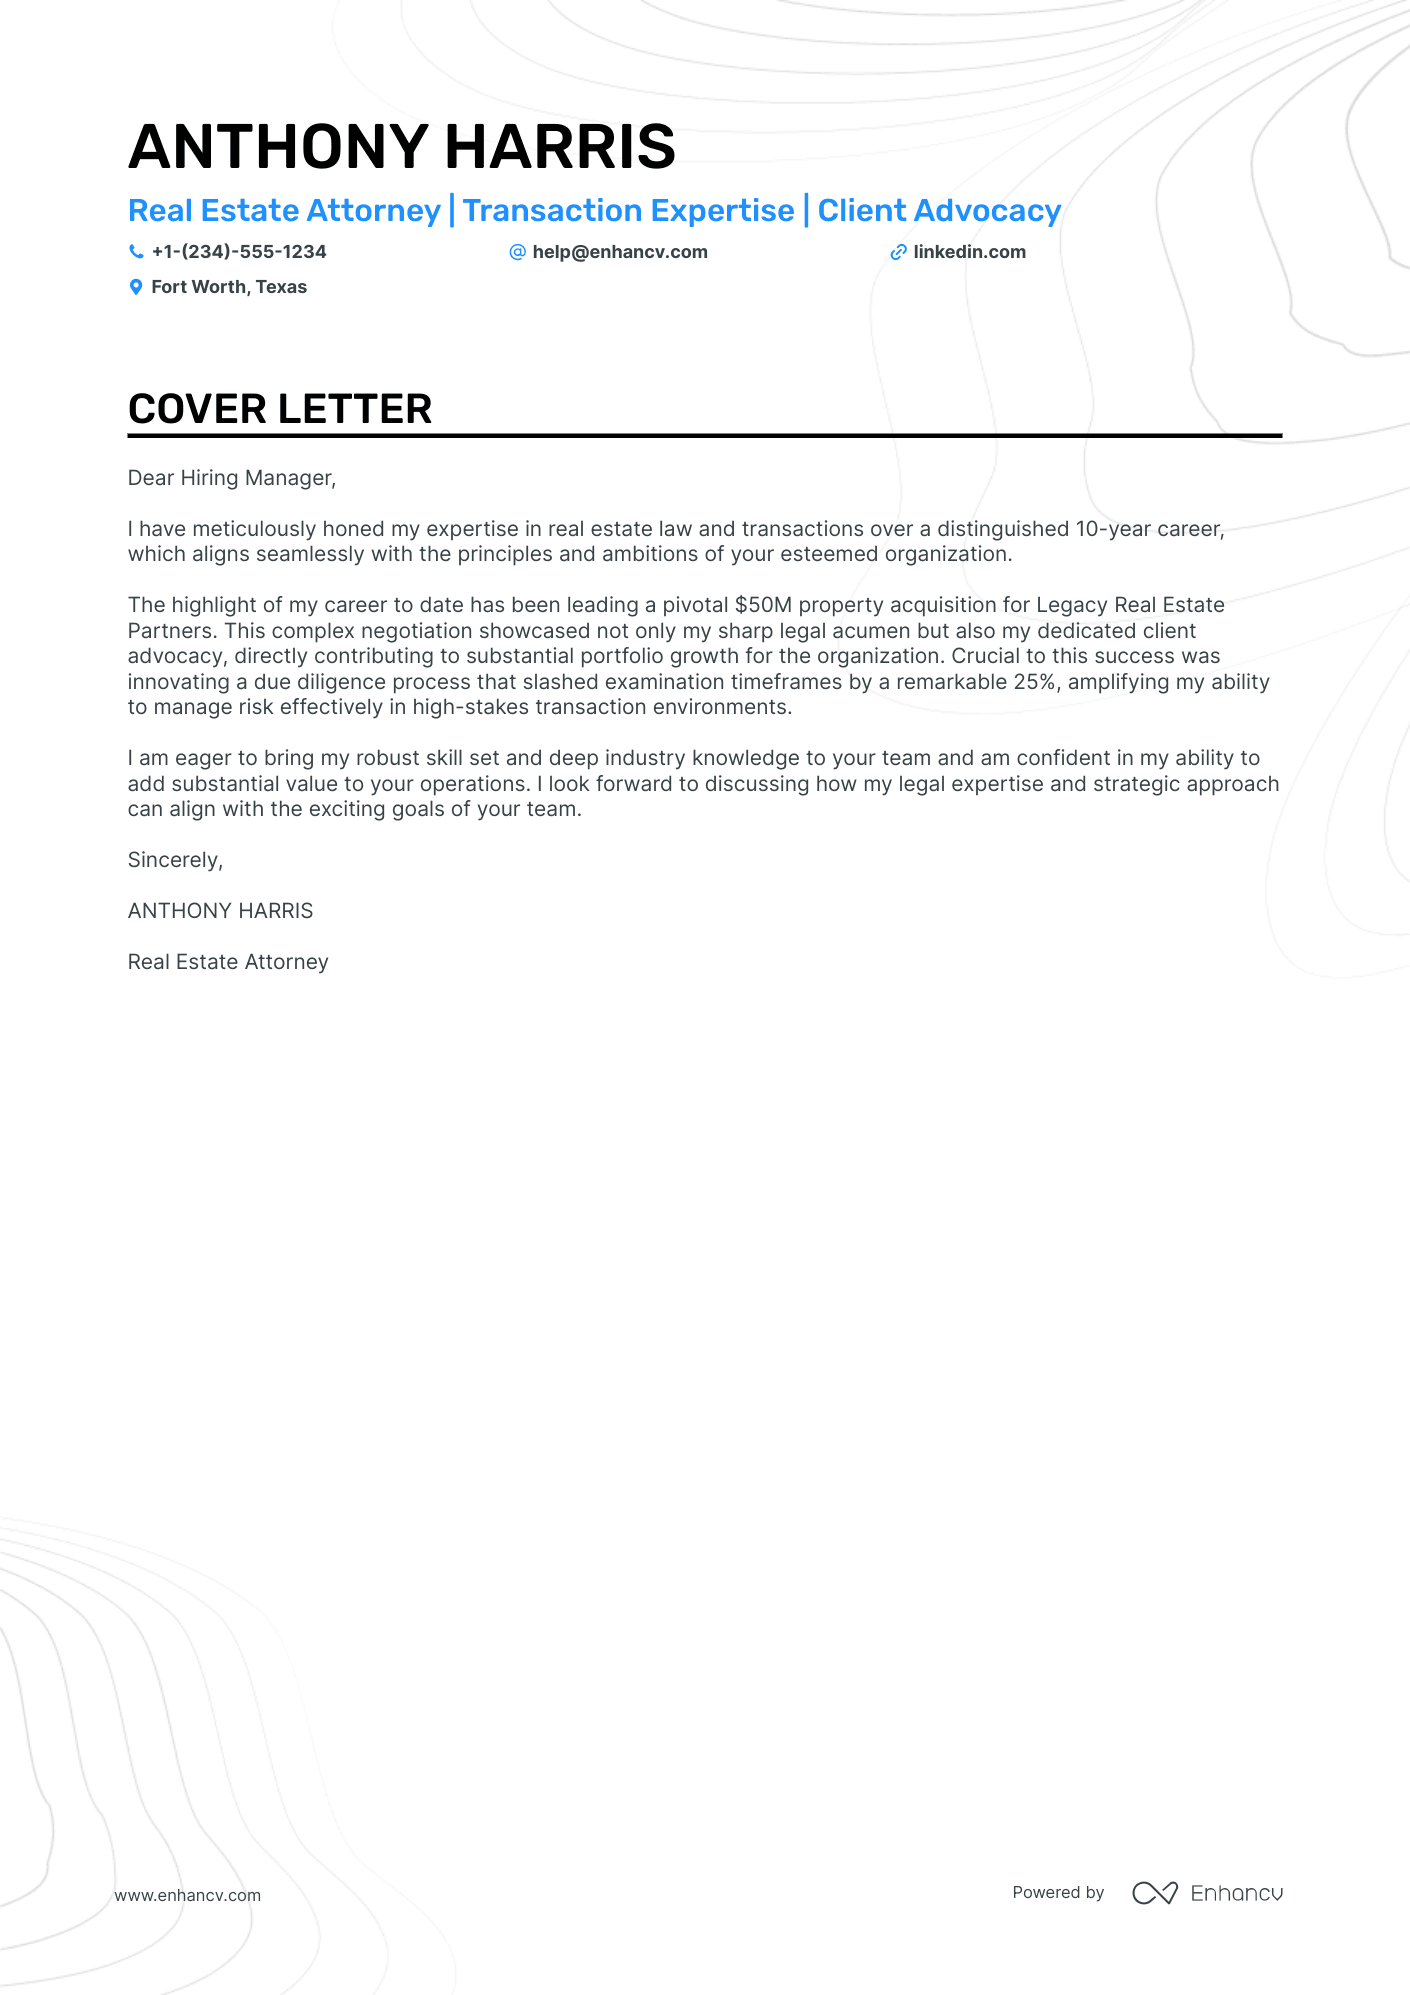 Real Estate Lawyer cover letter